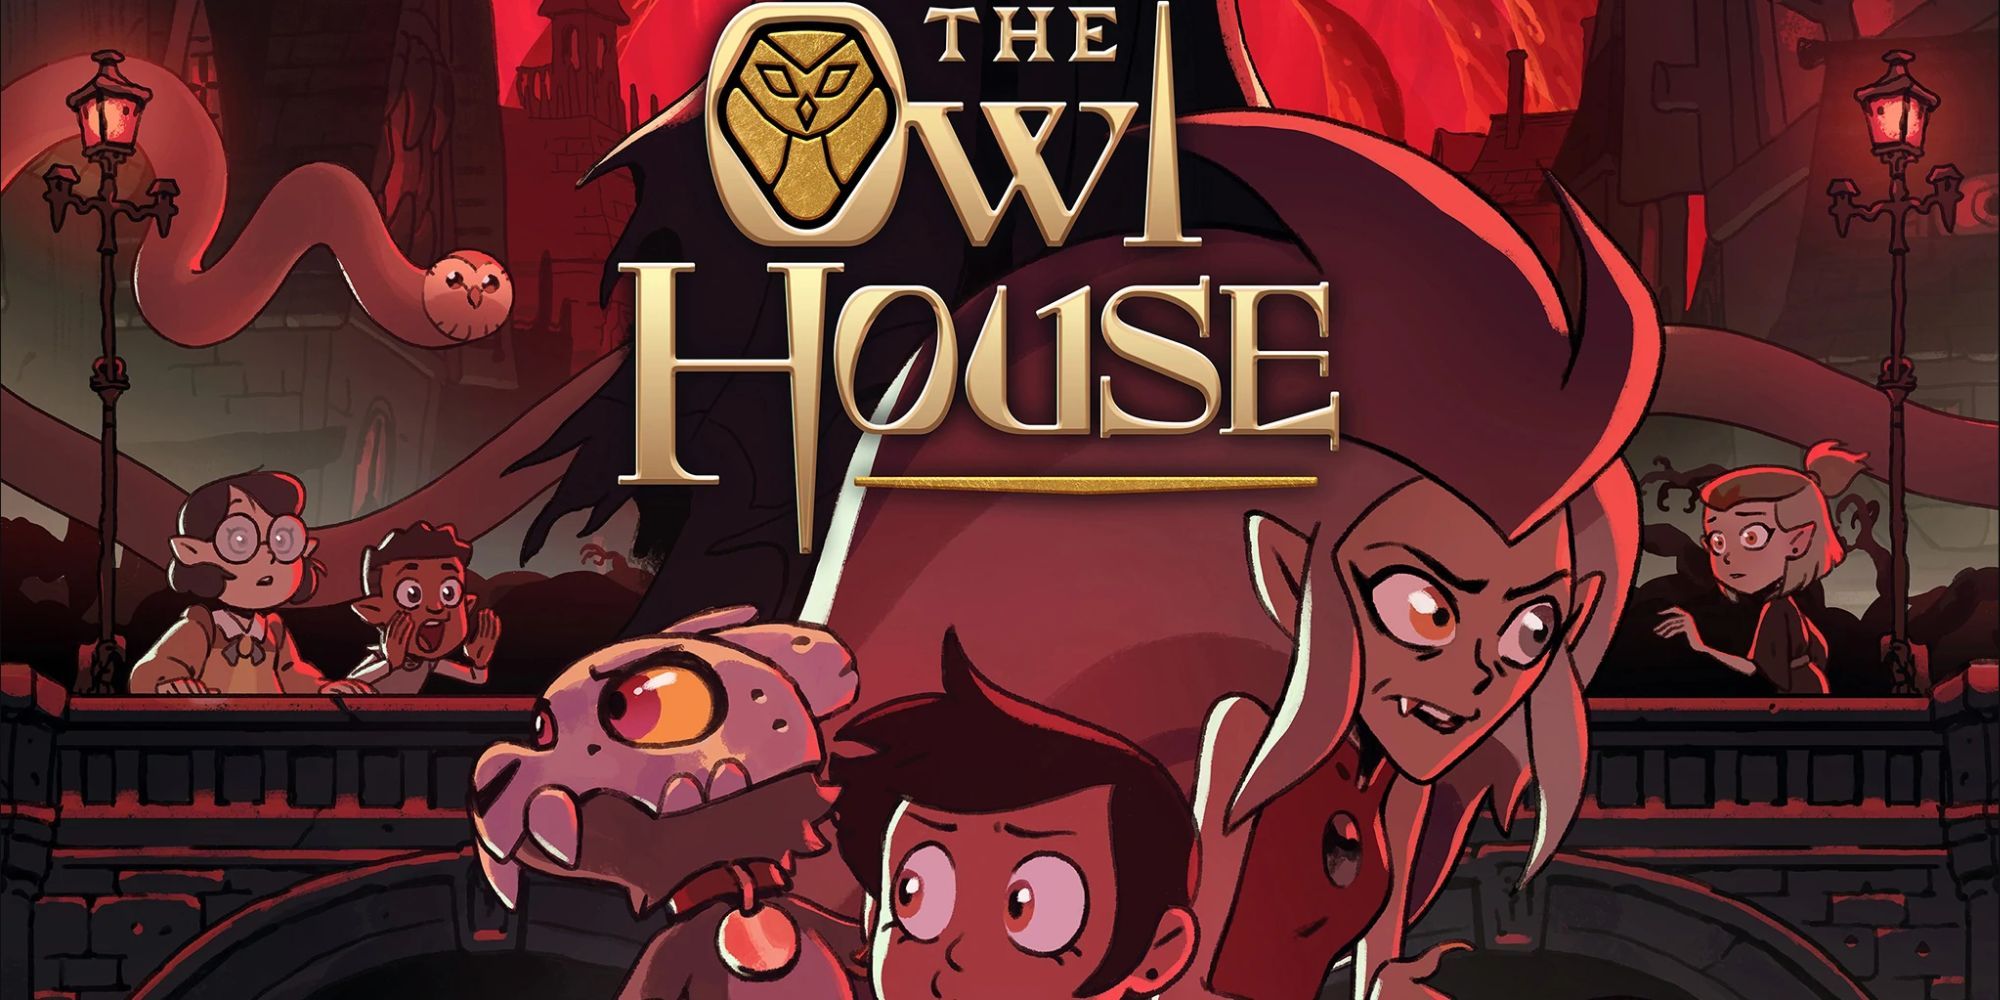 The Owl House Season 2 Premiere, Story, Trailer & News to Know